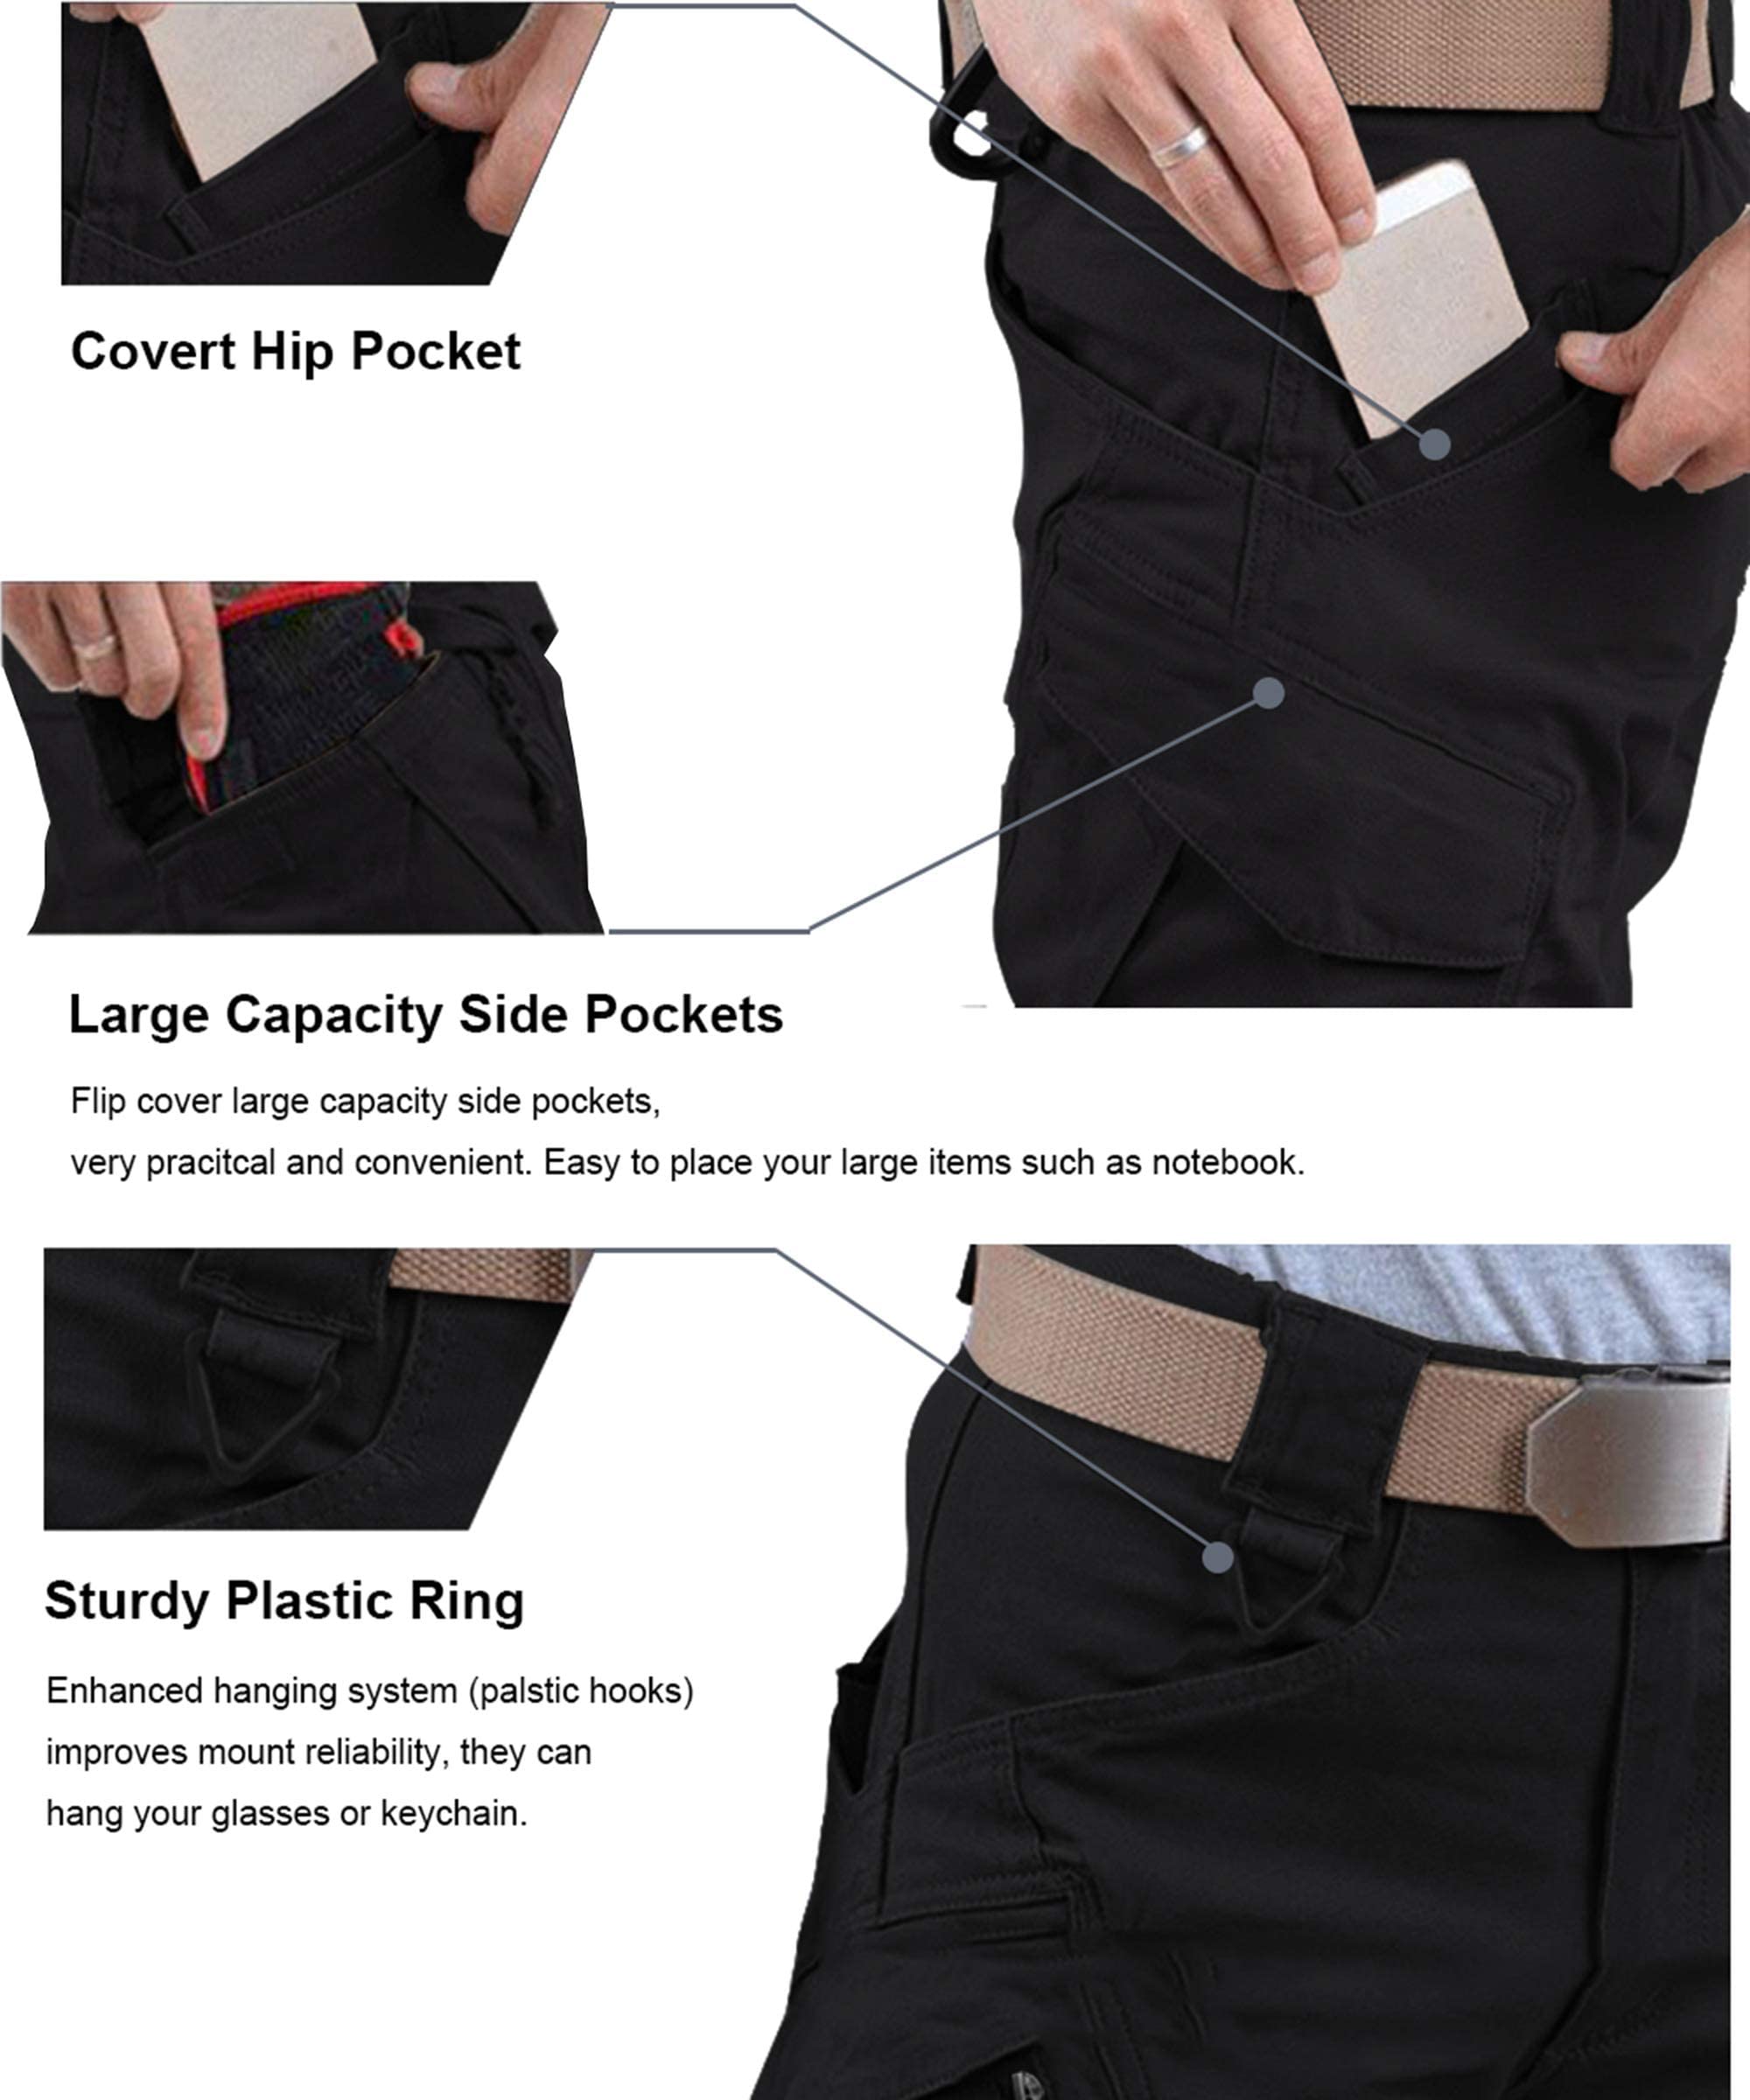 Susclude Men's Tactical Pants Stretch, 9 Pockets Rip Stop Lightweight Cargo Work Military Trousers Outdoor Hiking Pants Black 34Wx32L